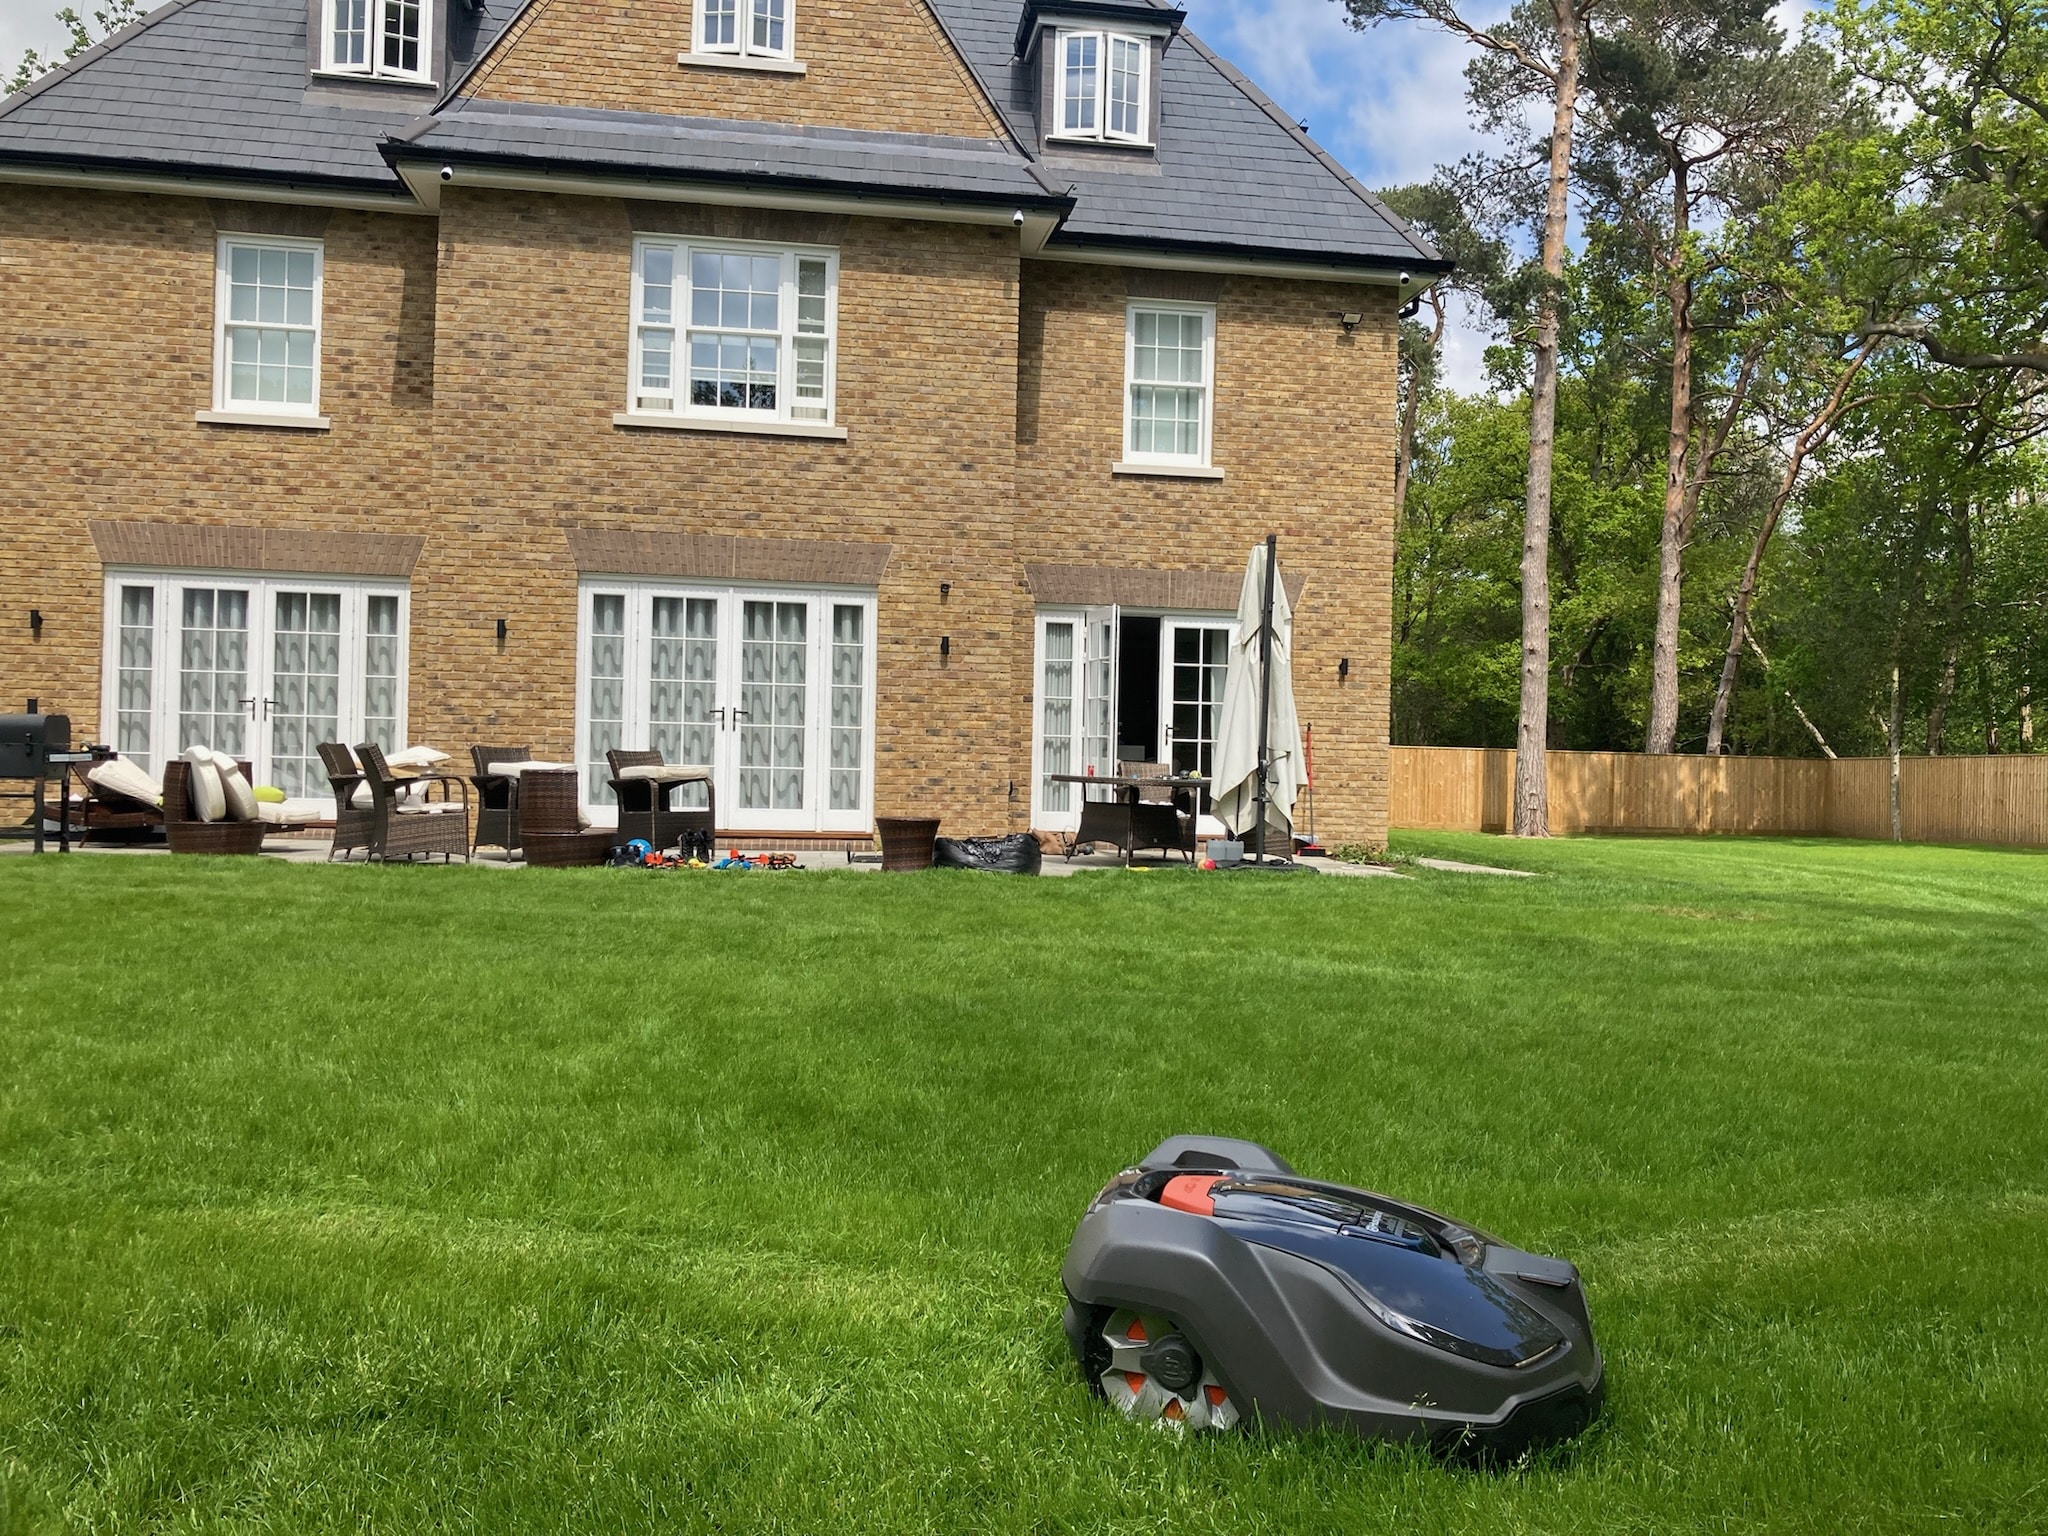 How Robotic Mowers Can Assist People with Disabilities